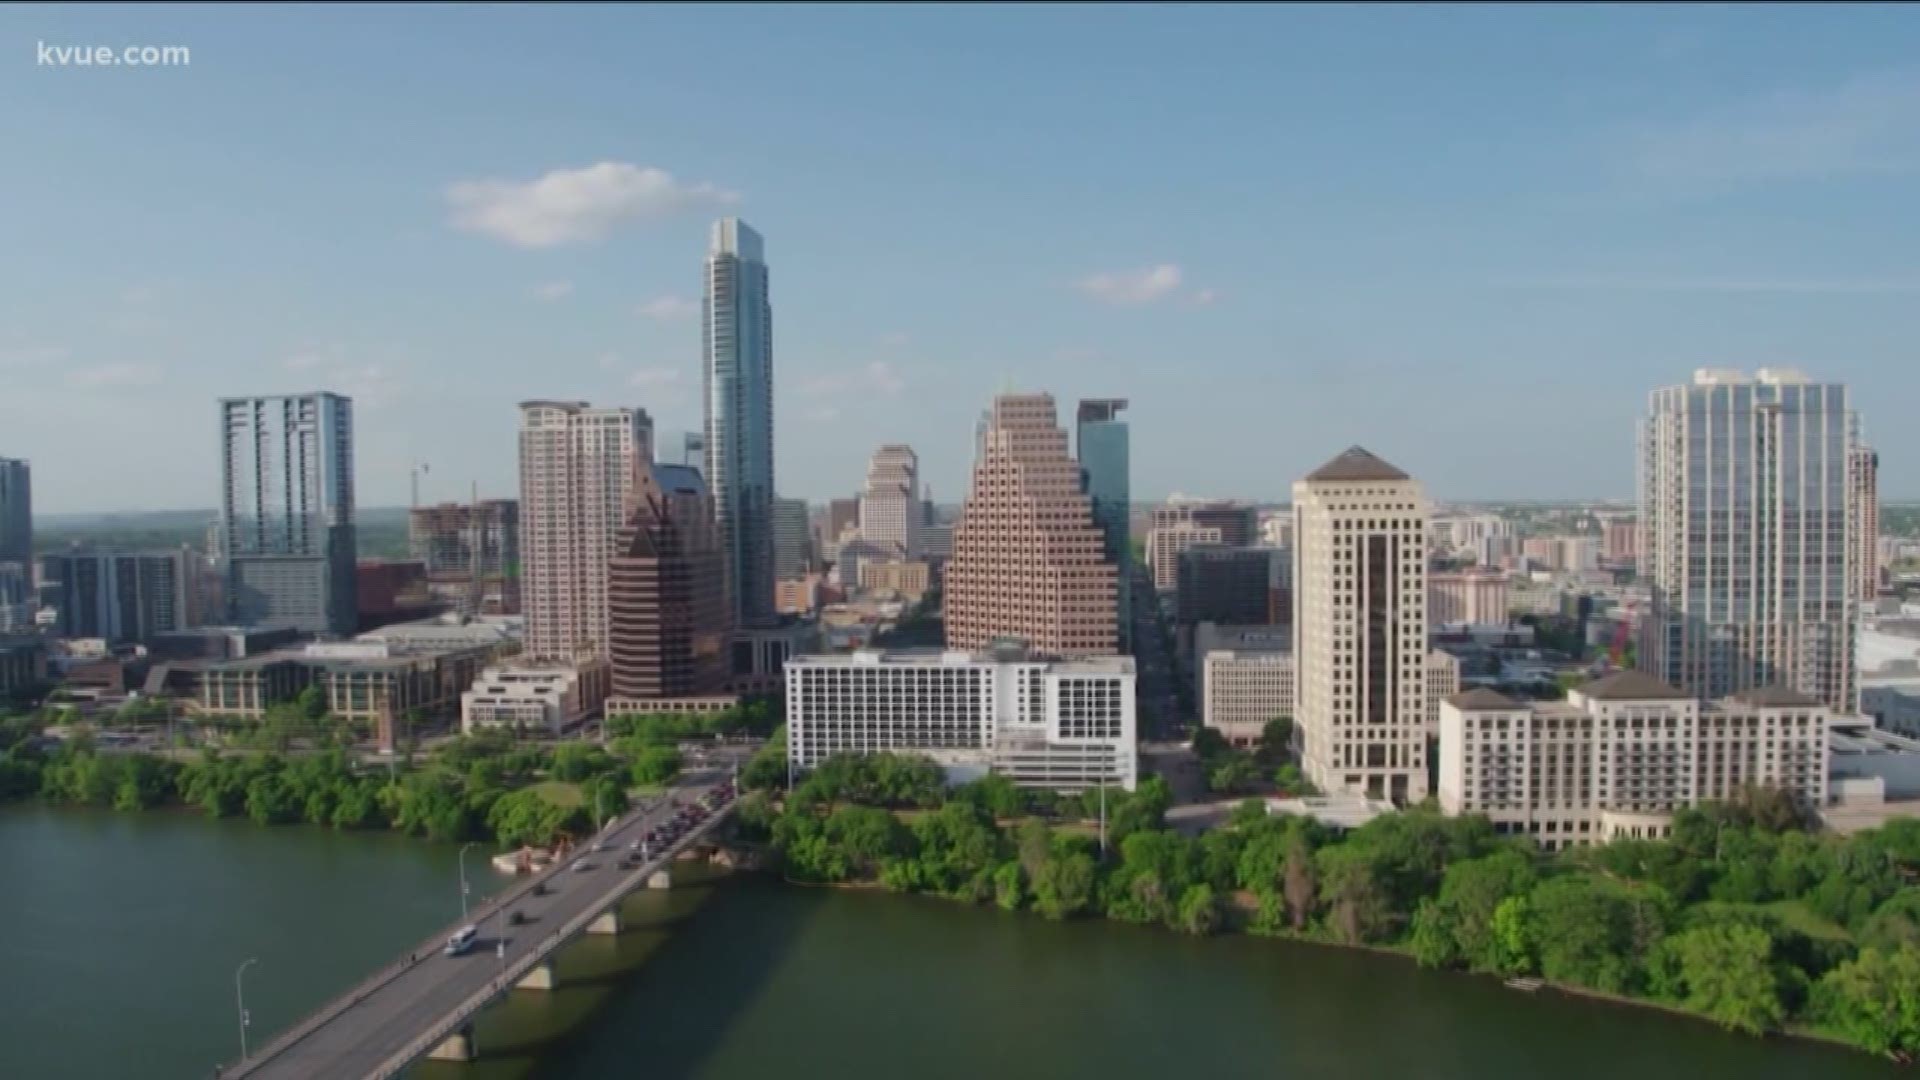 KVUE's Bob Buckalew brings an update to the latest COVID–19 trends in Texas.